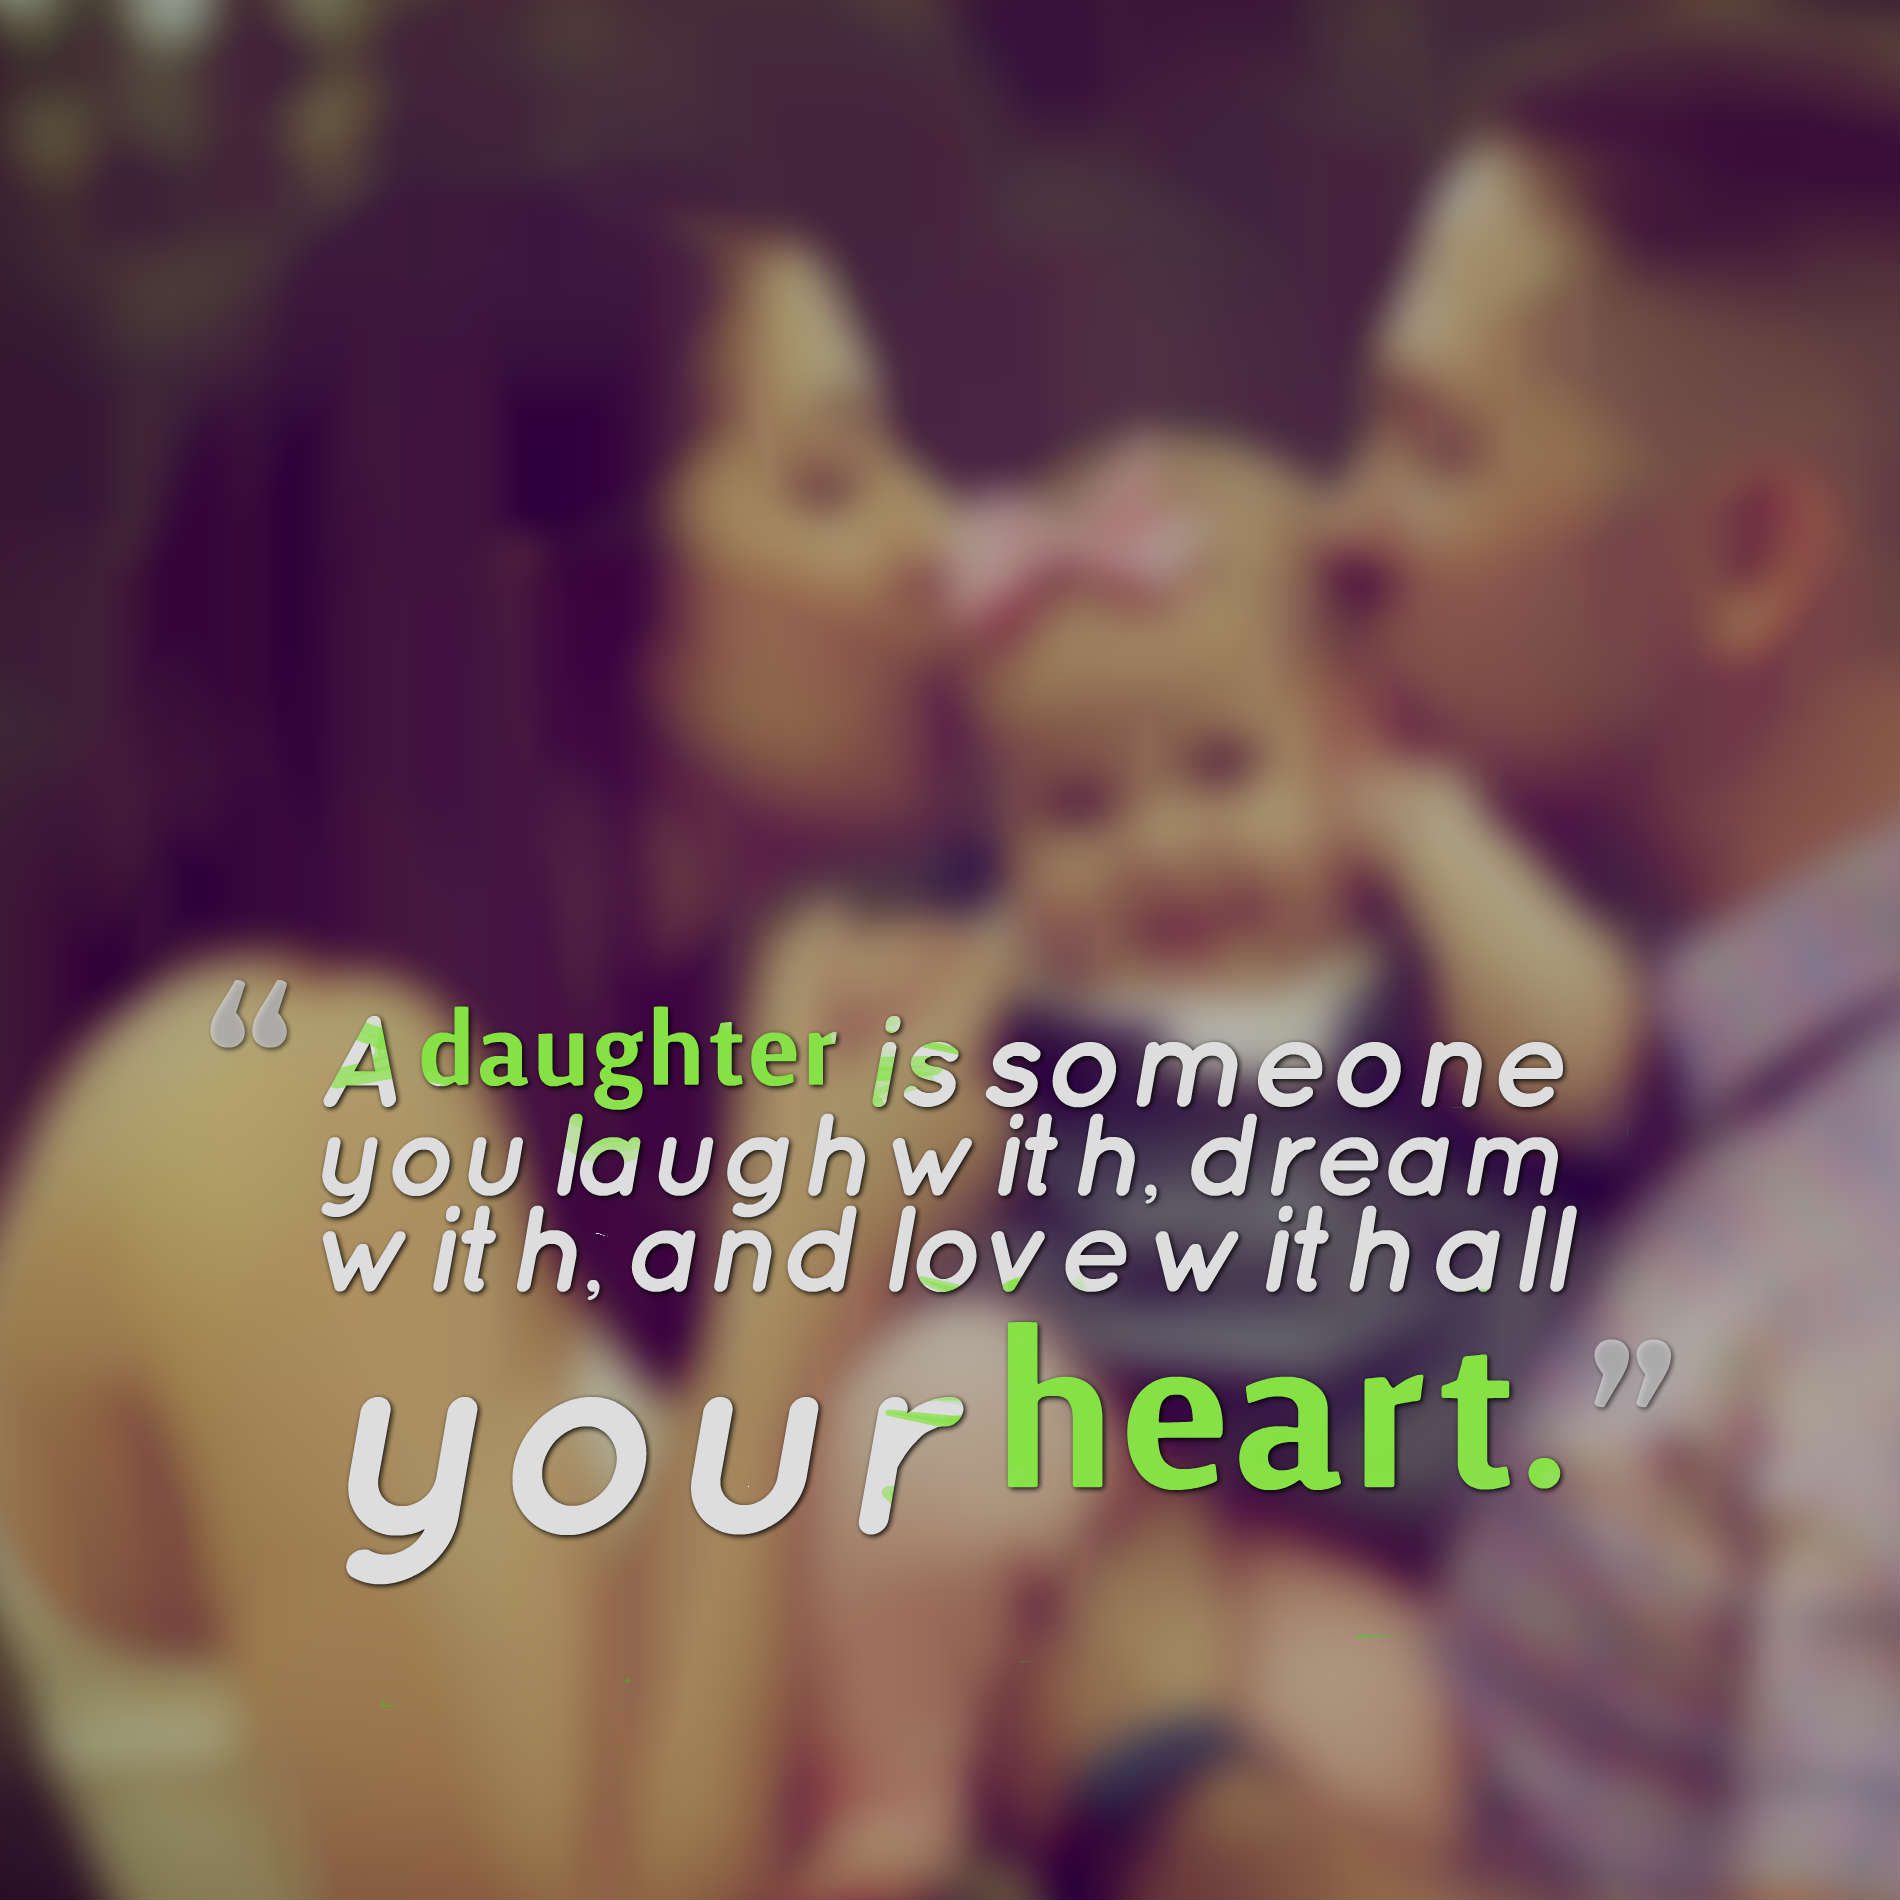 A daughter is someone you laugh with, dream with, and love with all your heart.